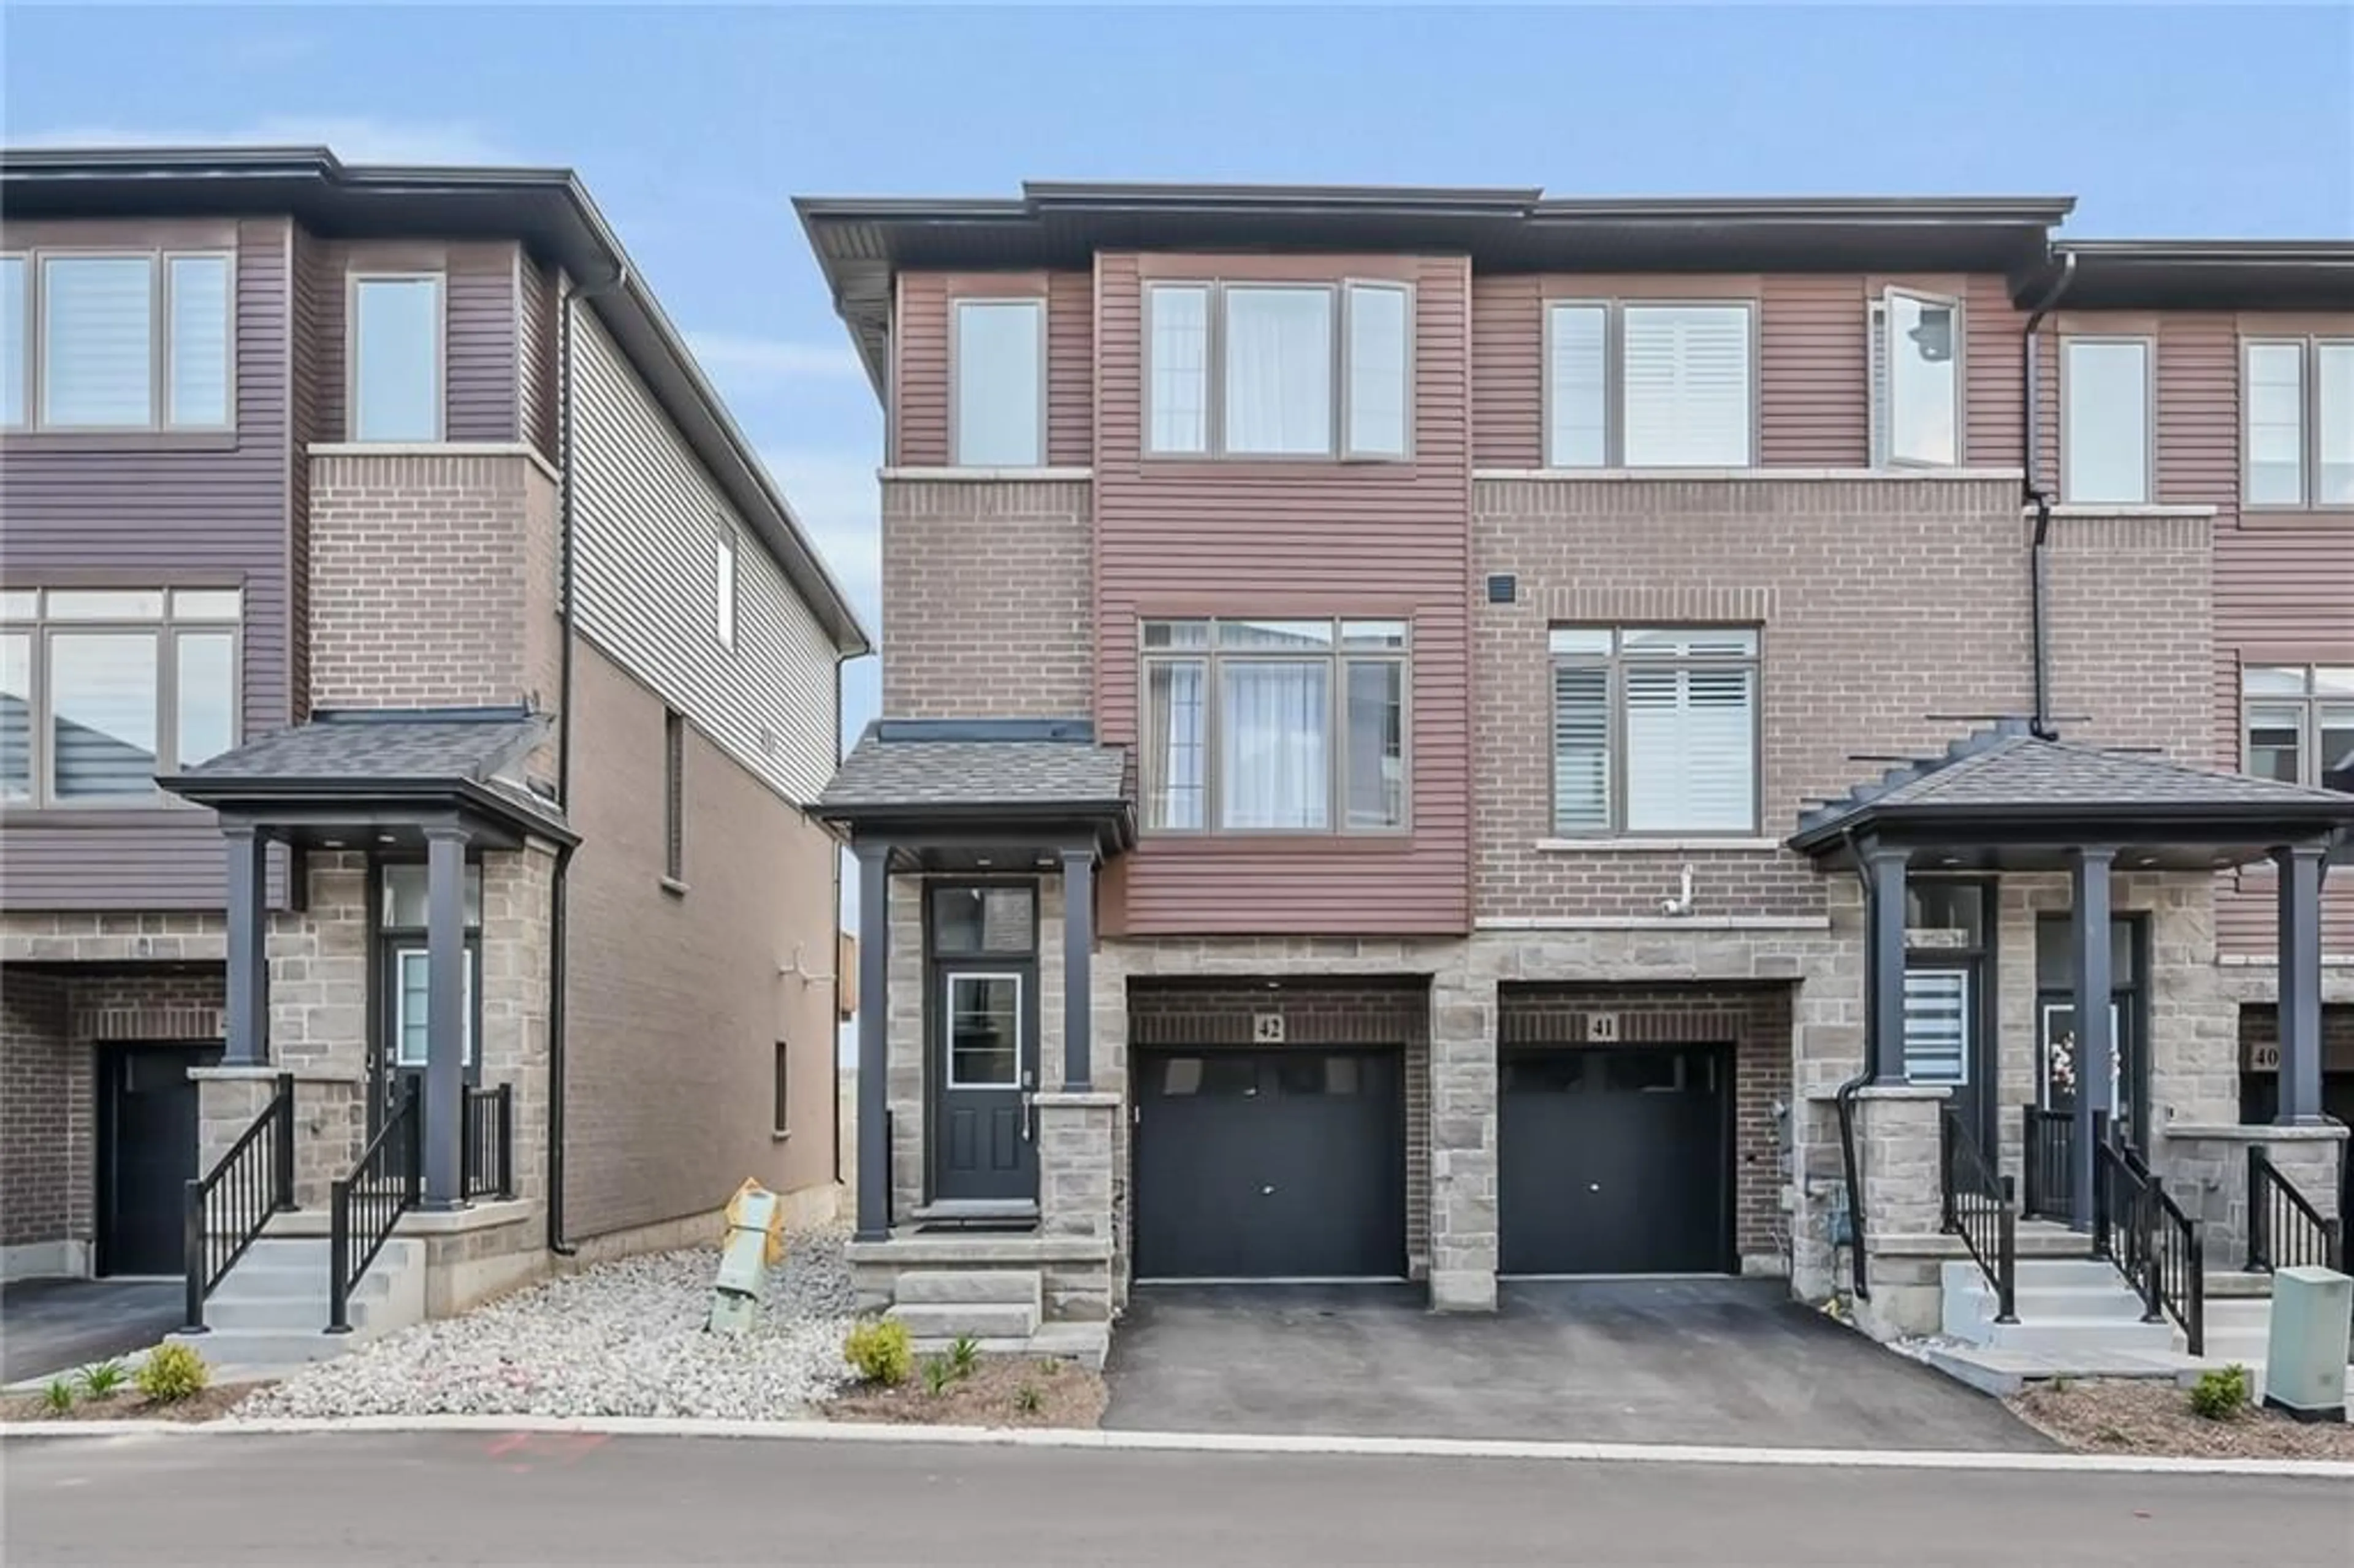 Home with brick exterior material for 61 SOHO St #42, Stoney Creek Ontario L8J 0M6